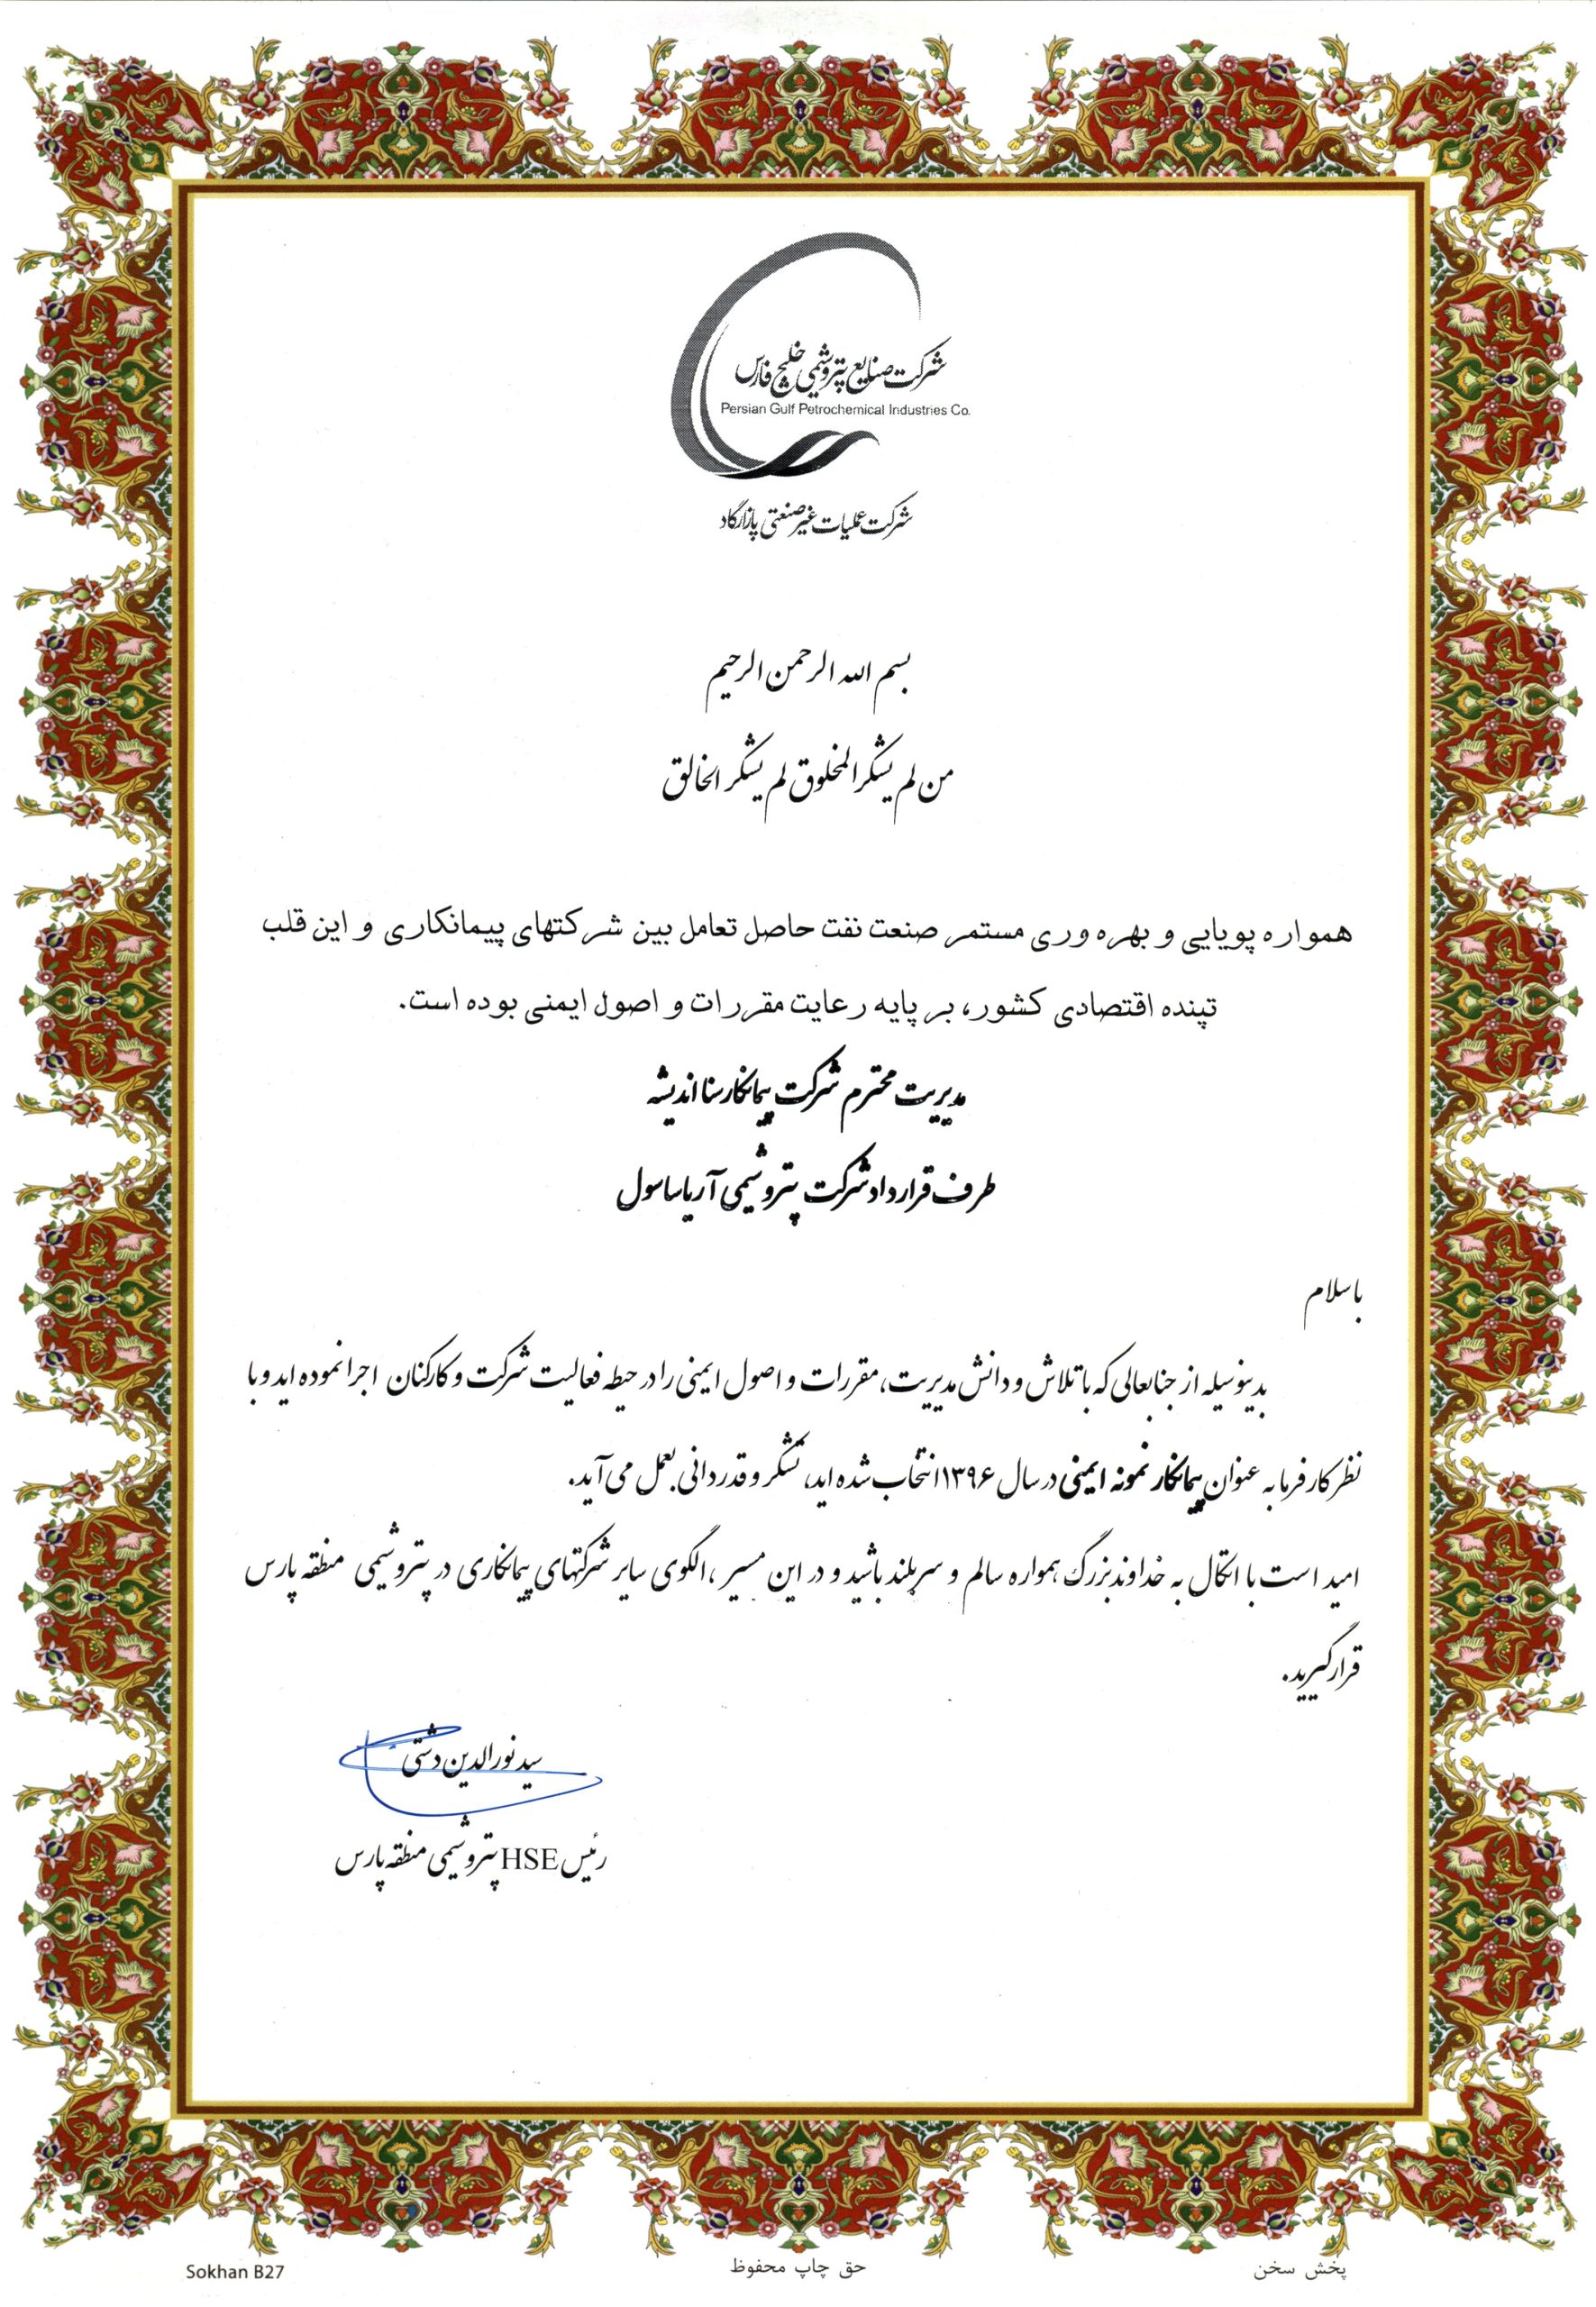 Acknowledgment of Ariassol Petrochemical Company